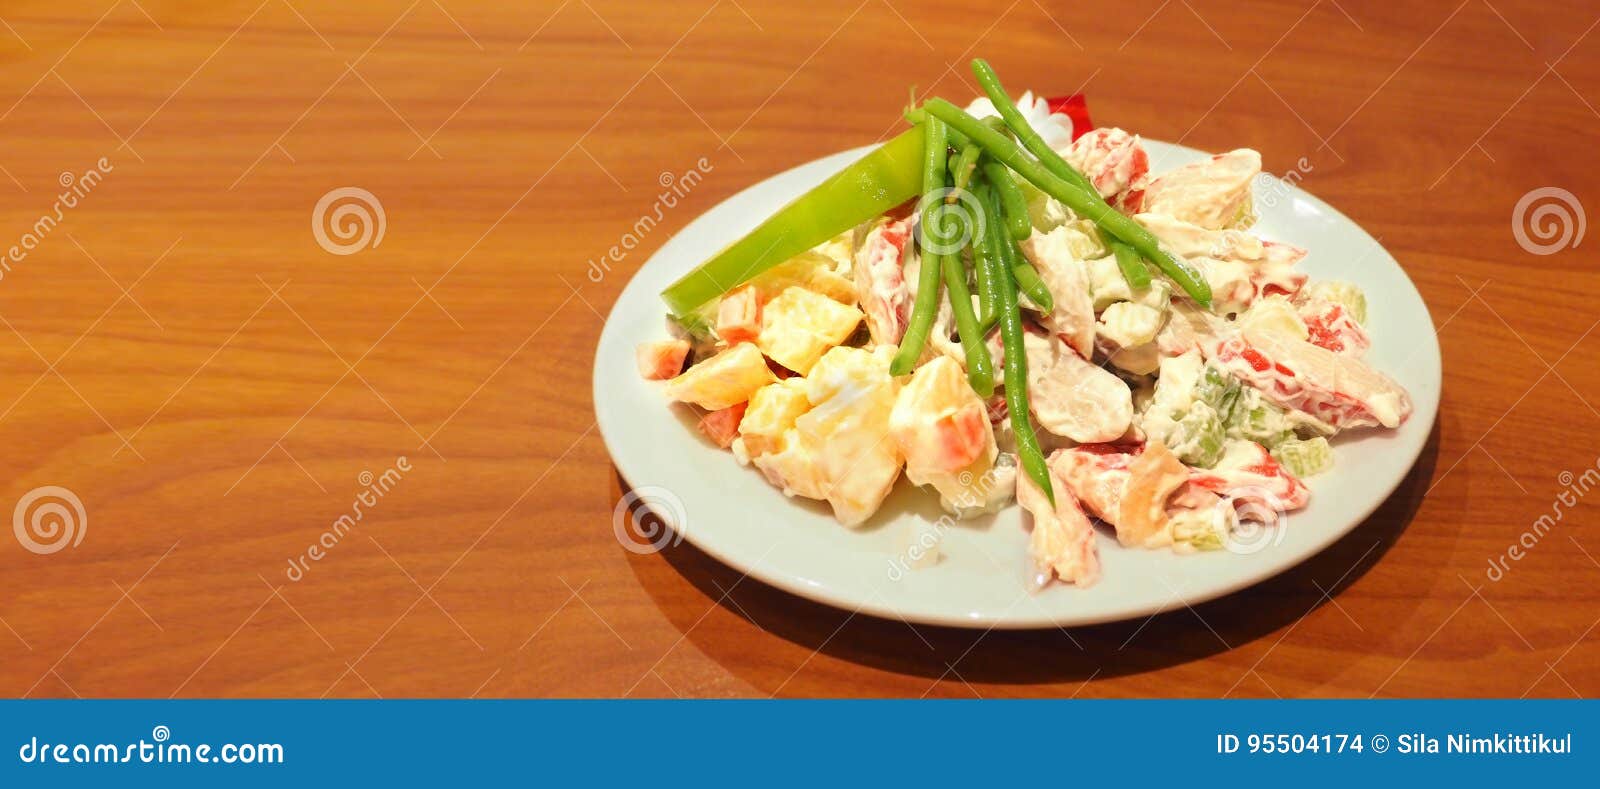 Imitation Crab Stick Salad Healthy Food Has Copy Space Stock Photo Image Of Object Strawbery 95504174